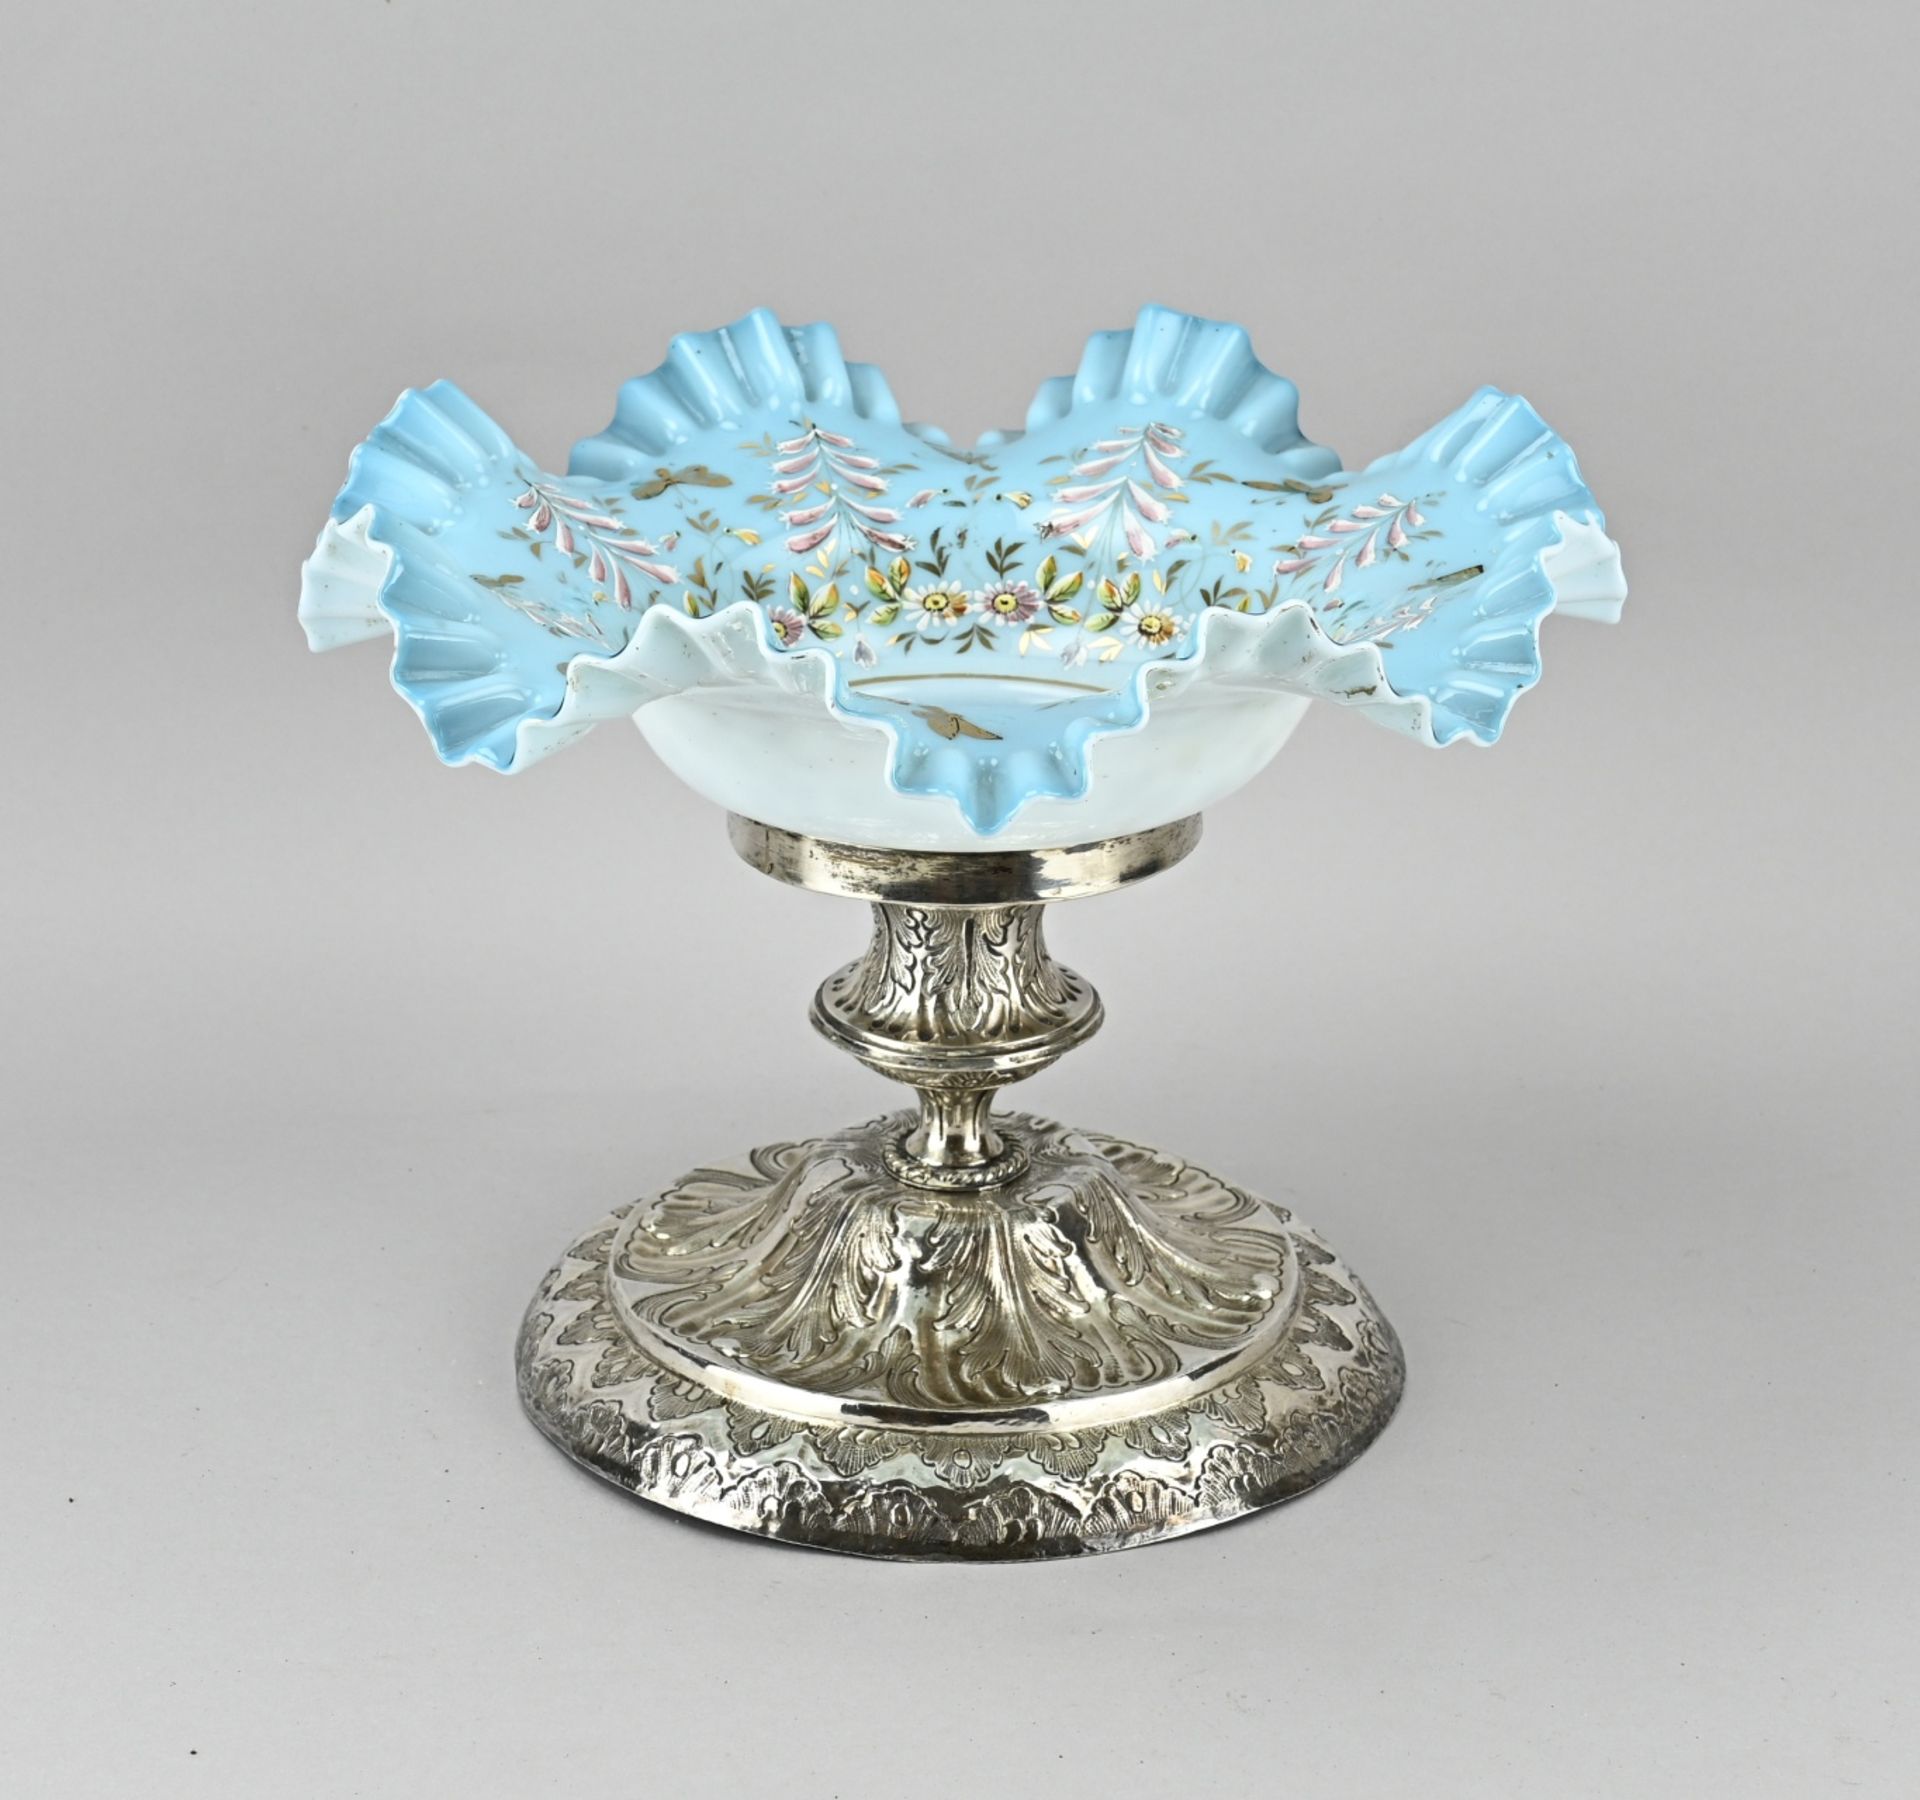 Table piece with opaline glass